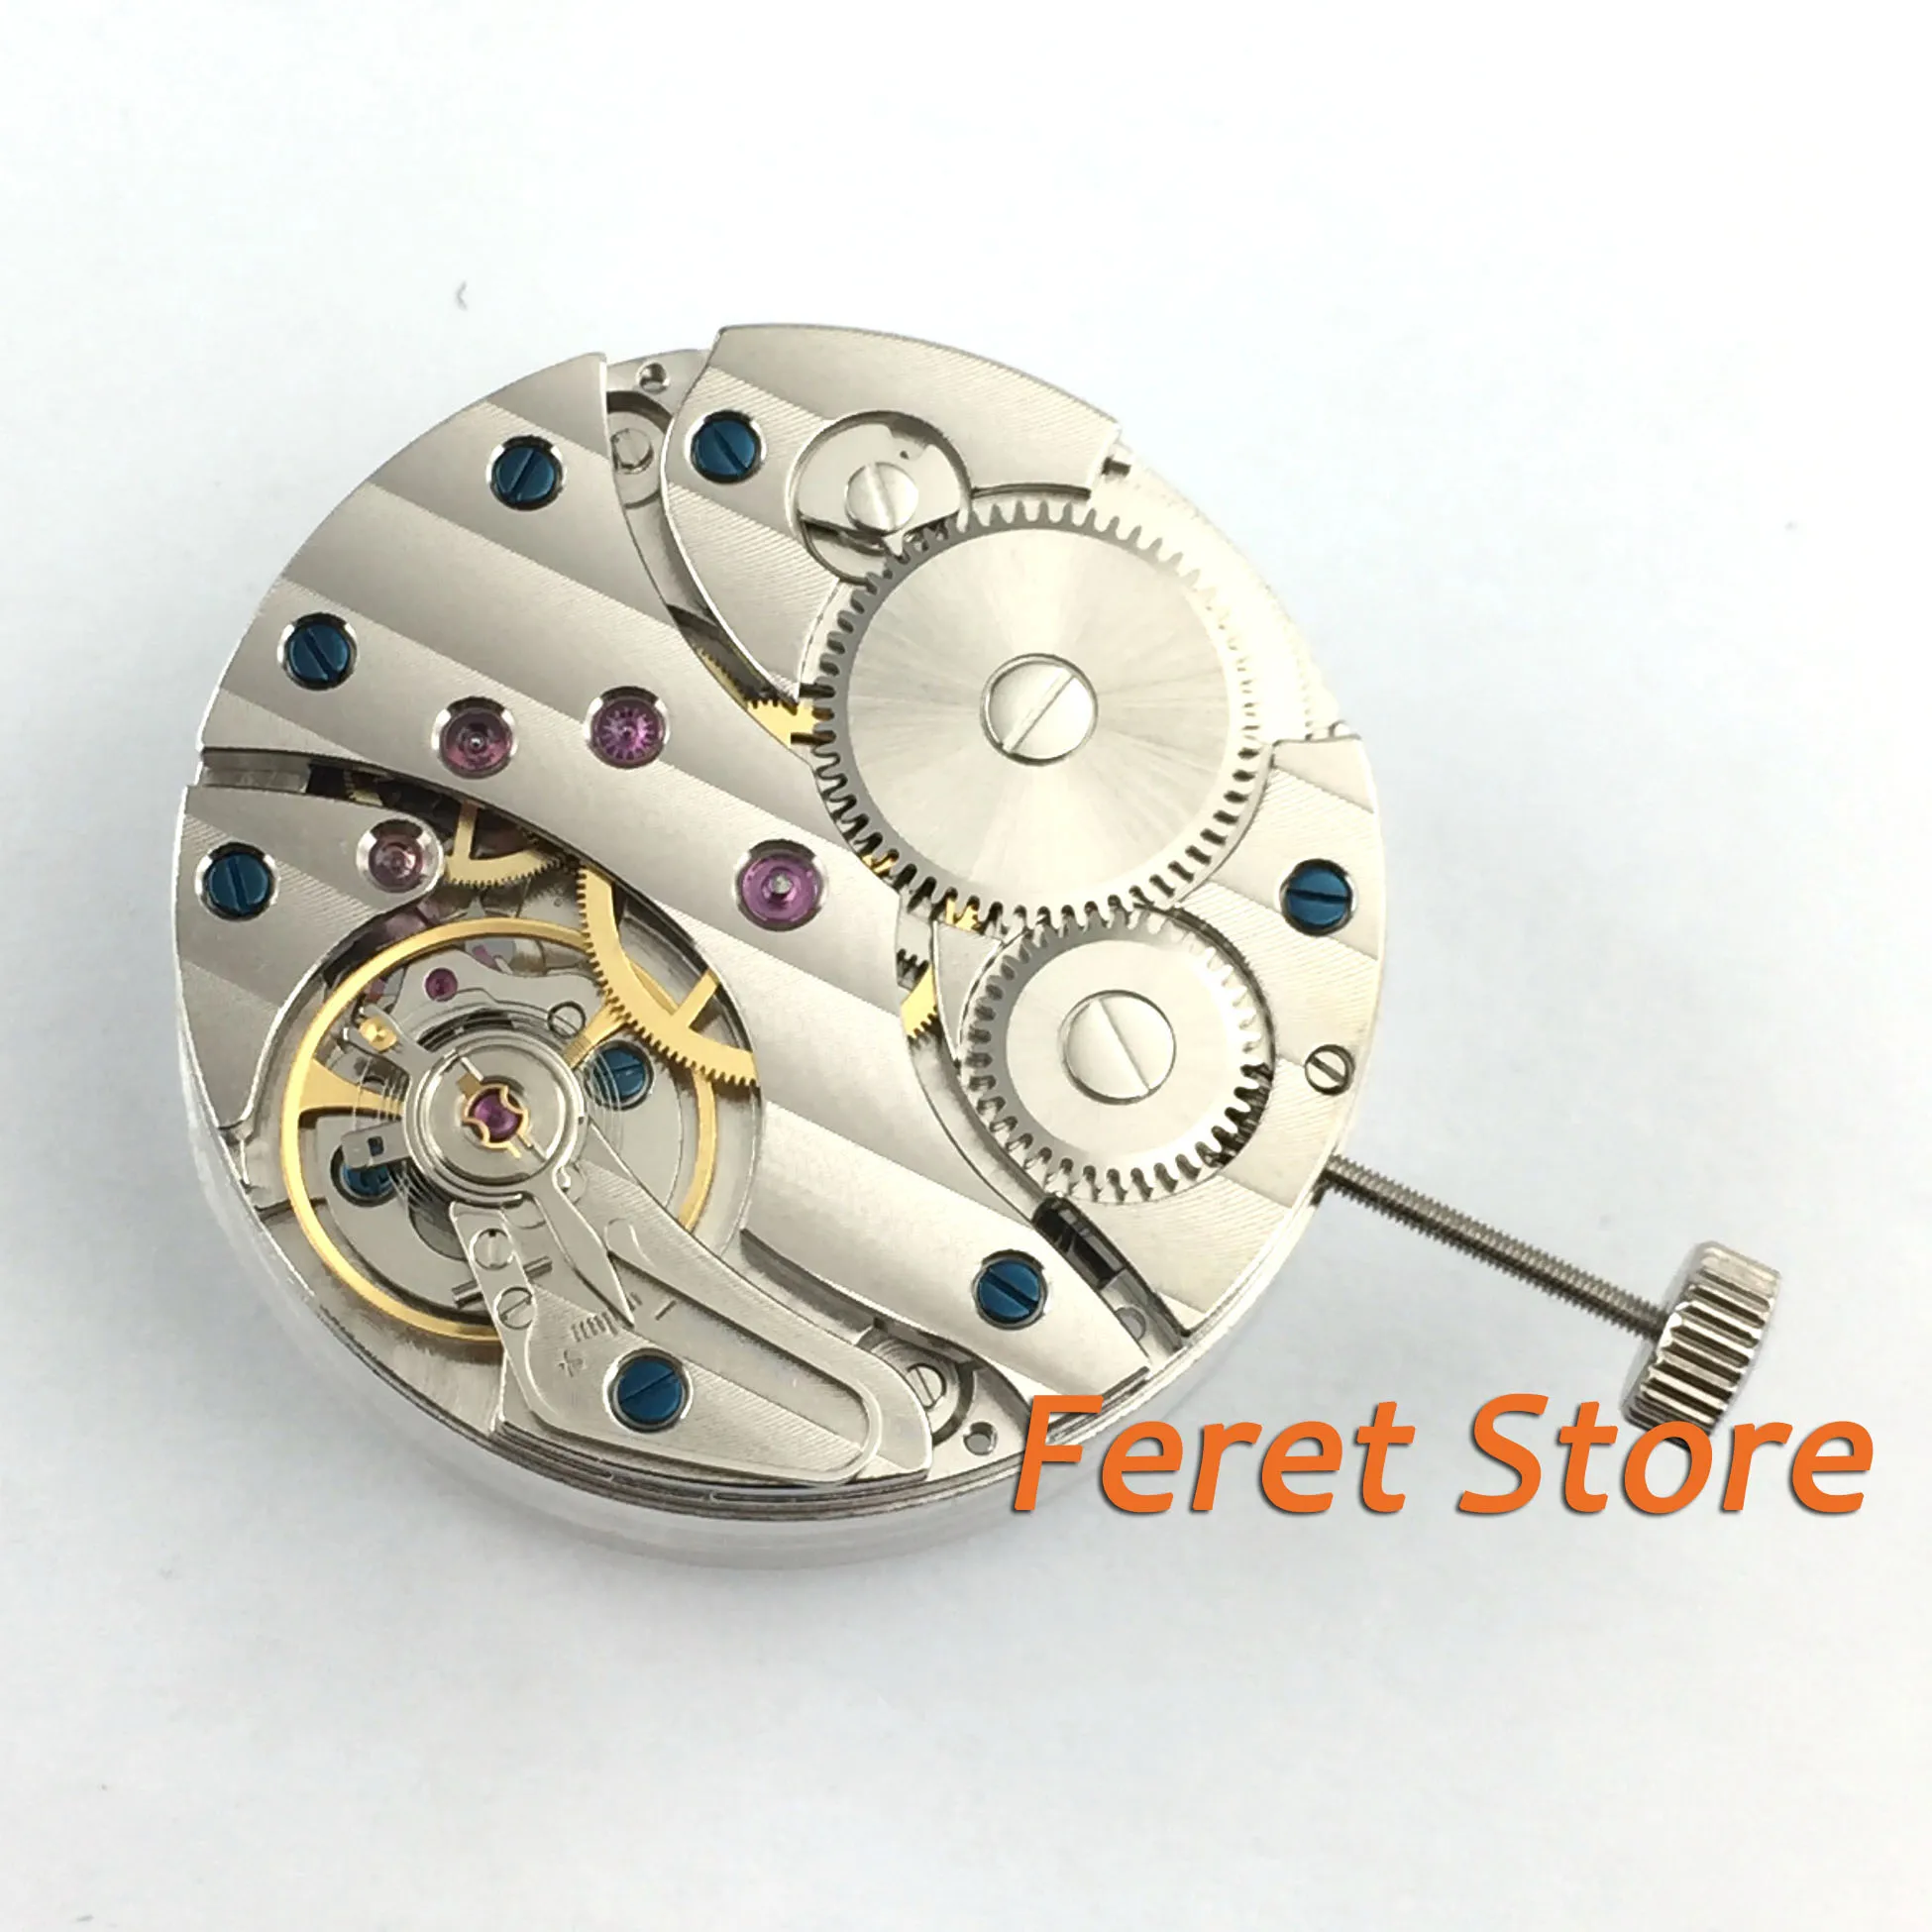 36.6mm Watch movement 17 Jewels Swan Neck 6497 Hand winding Movement fit Parnis mens watch p71